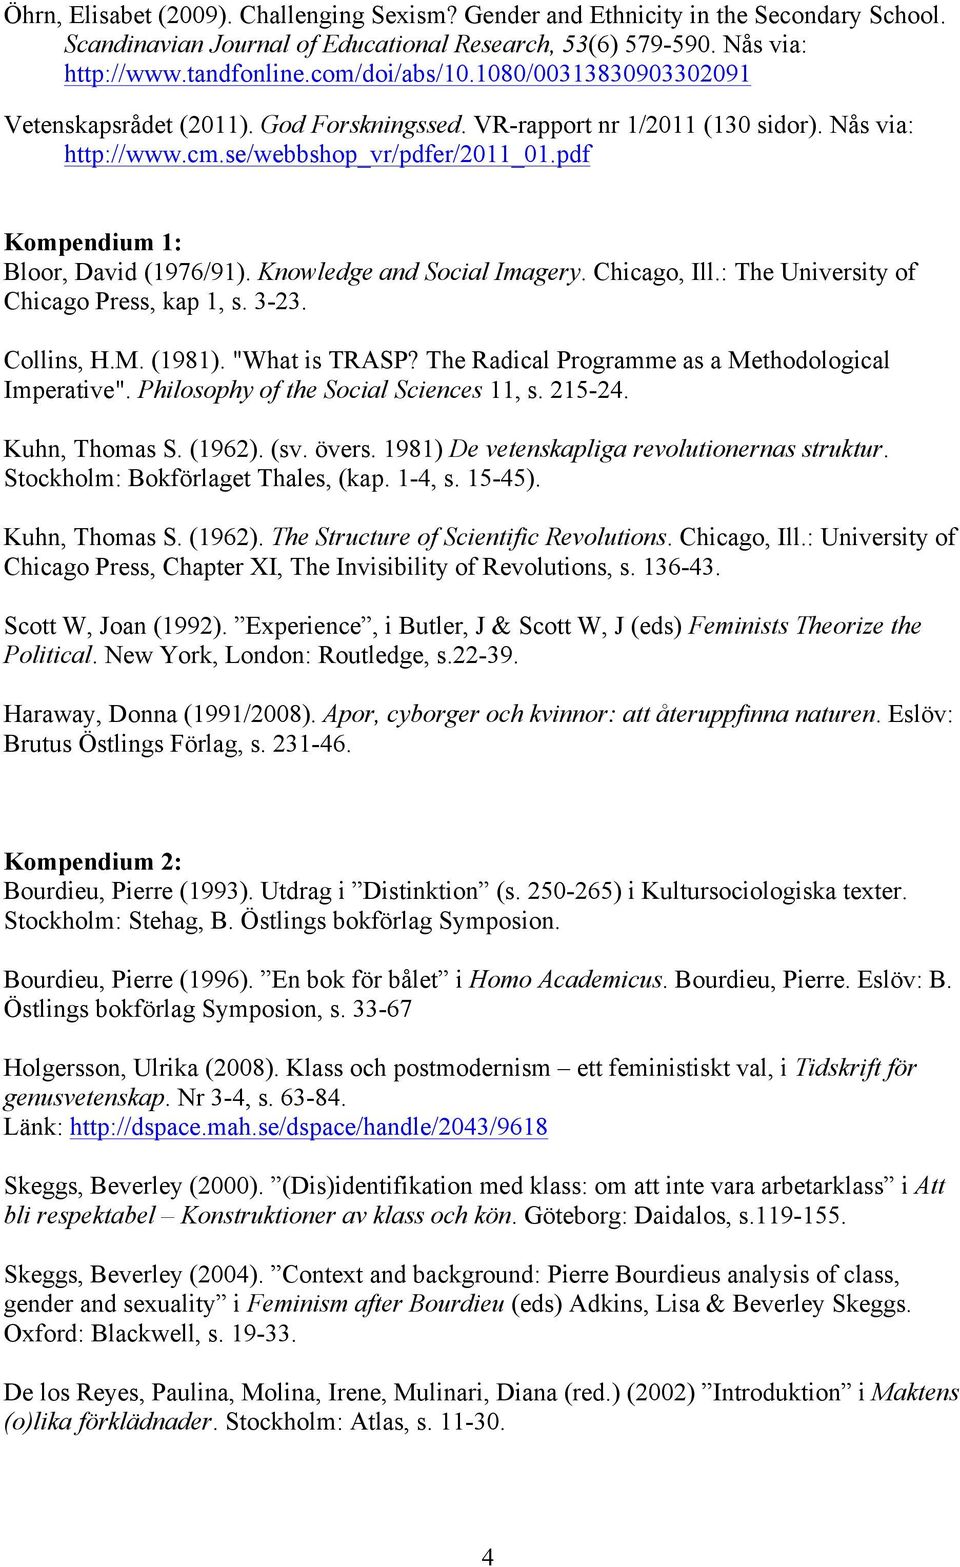 Knowledge and Social Imagery. Chicago, Ill.: The University of Chicago Press, kap 1, s. 3-23. Collins, H.M. (1981). "What is TRASP? The Radical Programme as a Methodological Imperative".